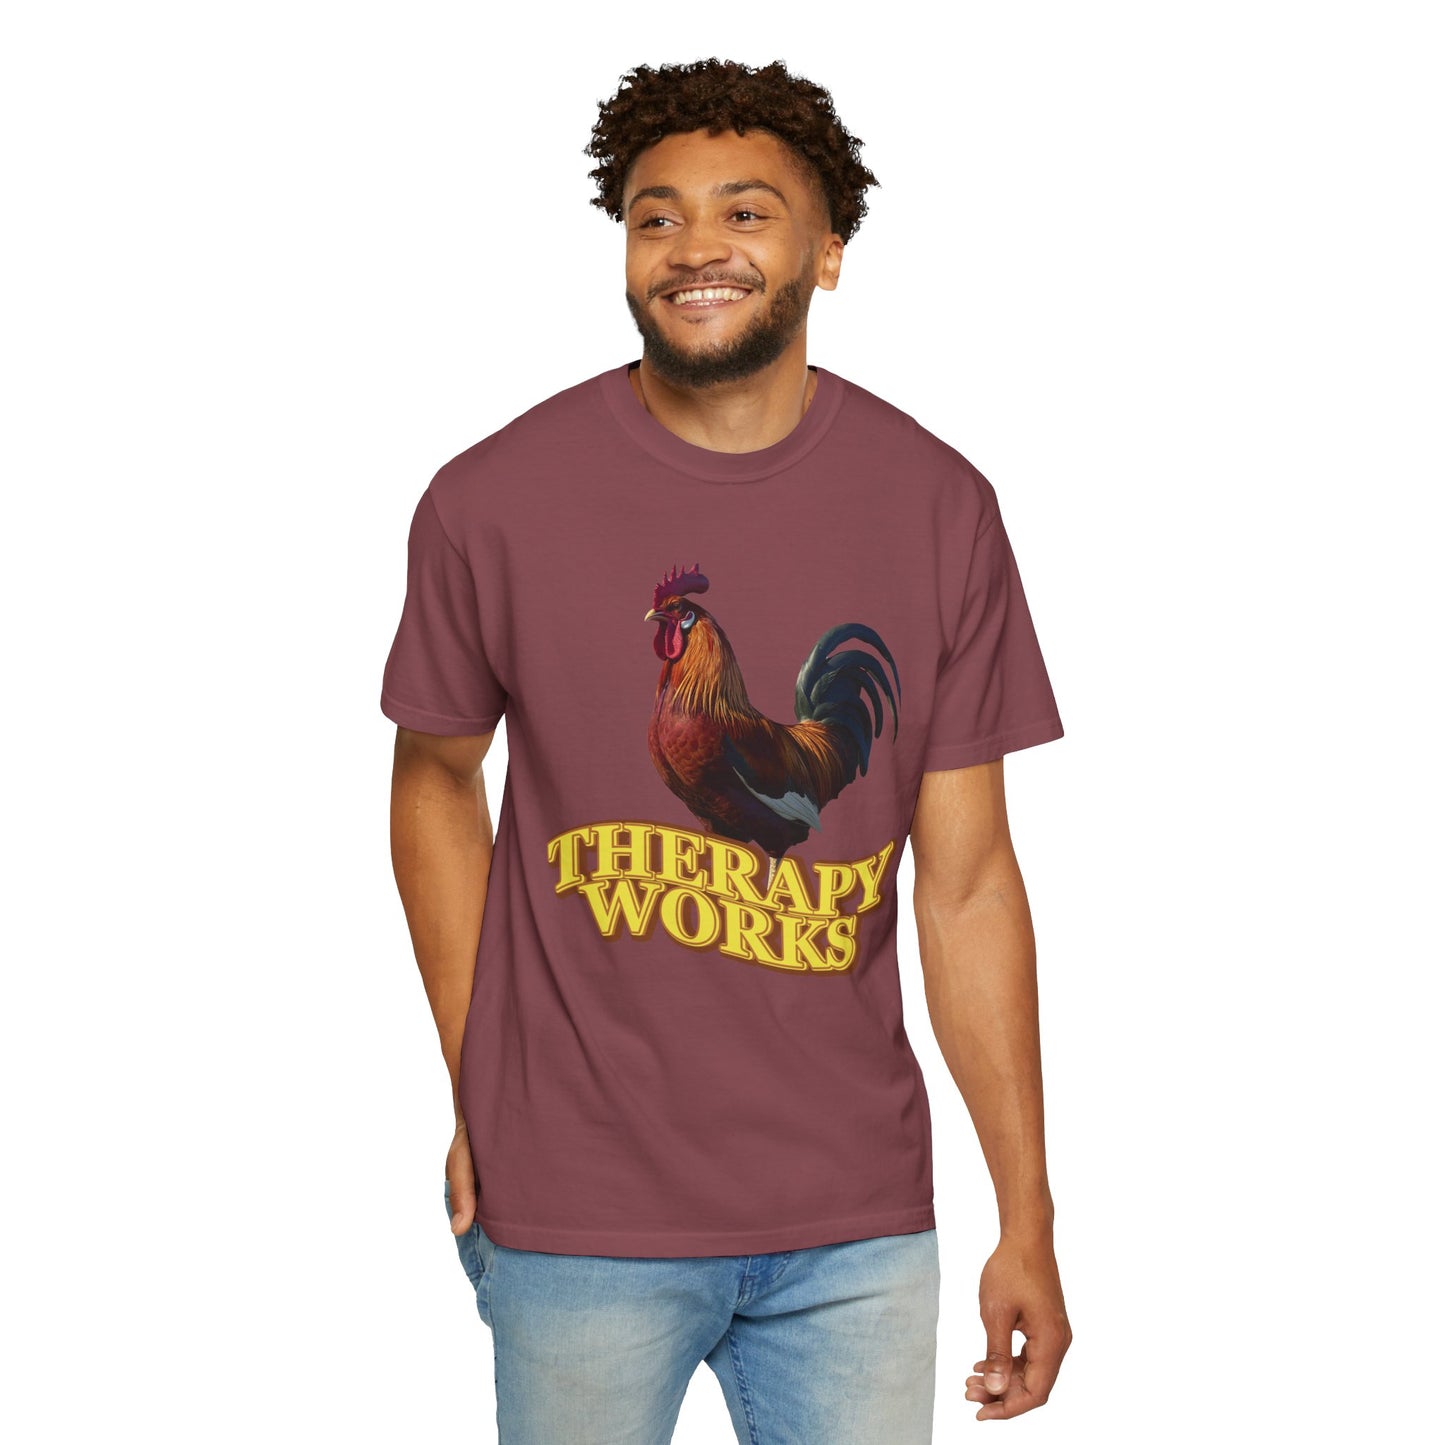 Therapy Works - Tee